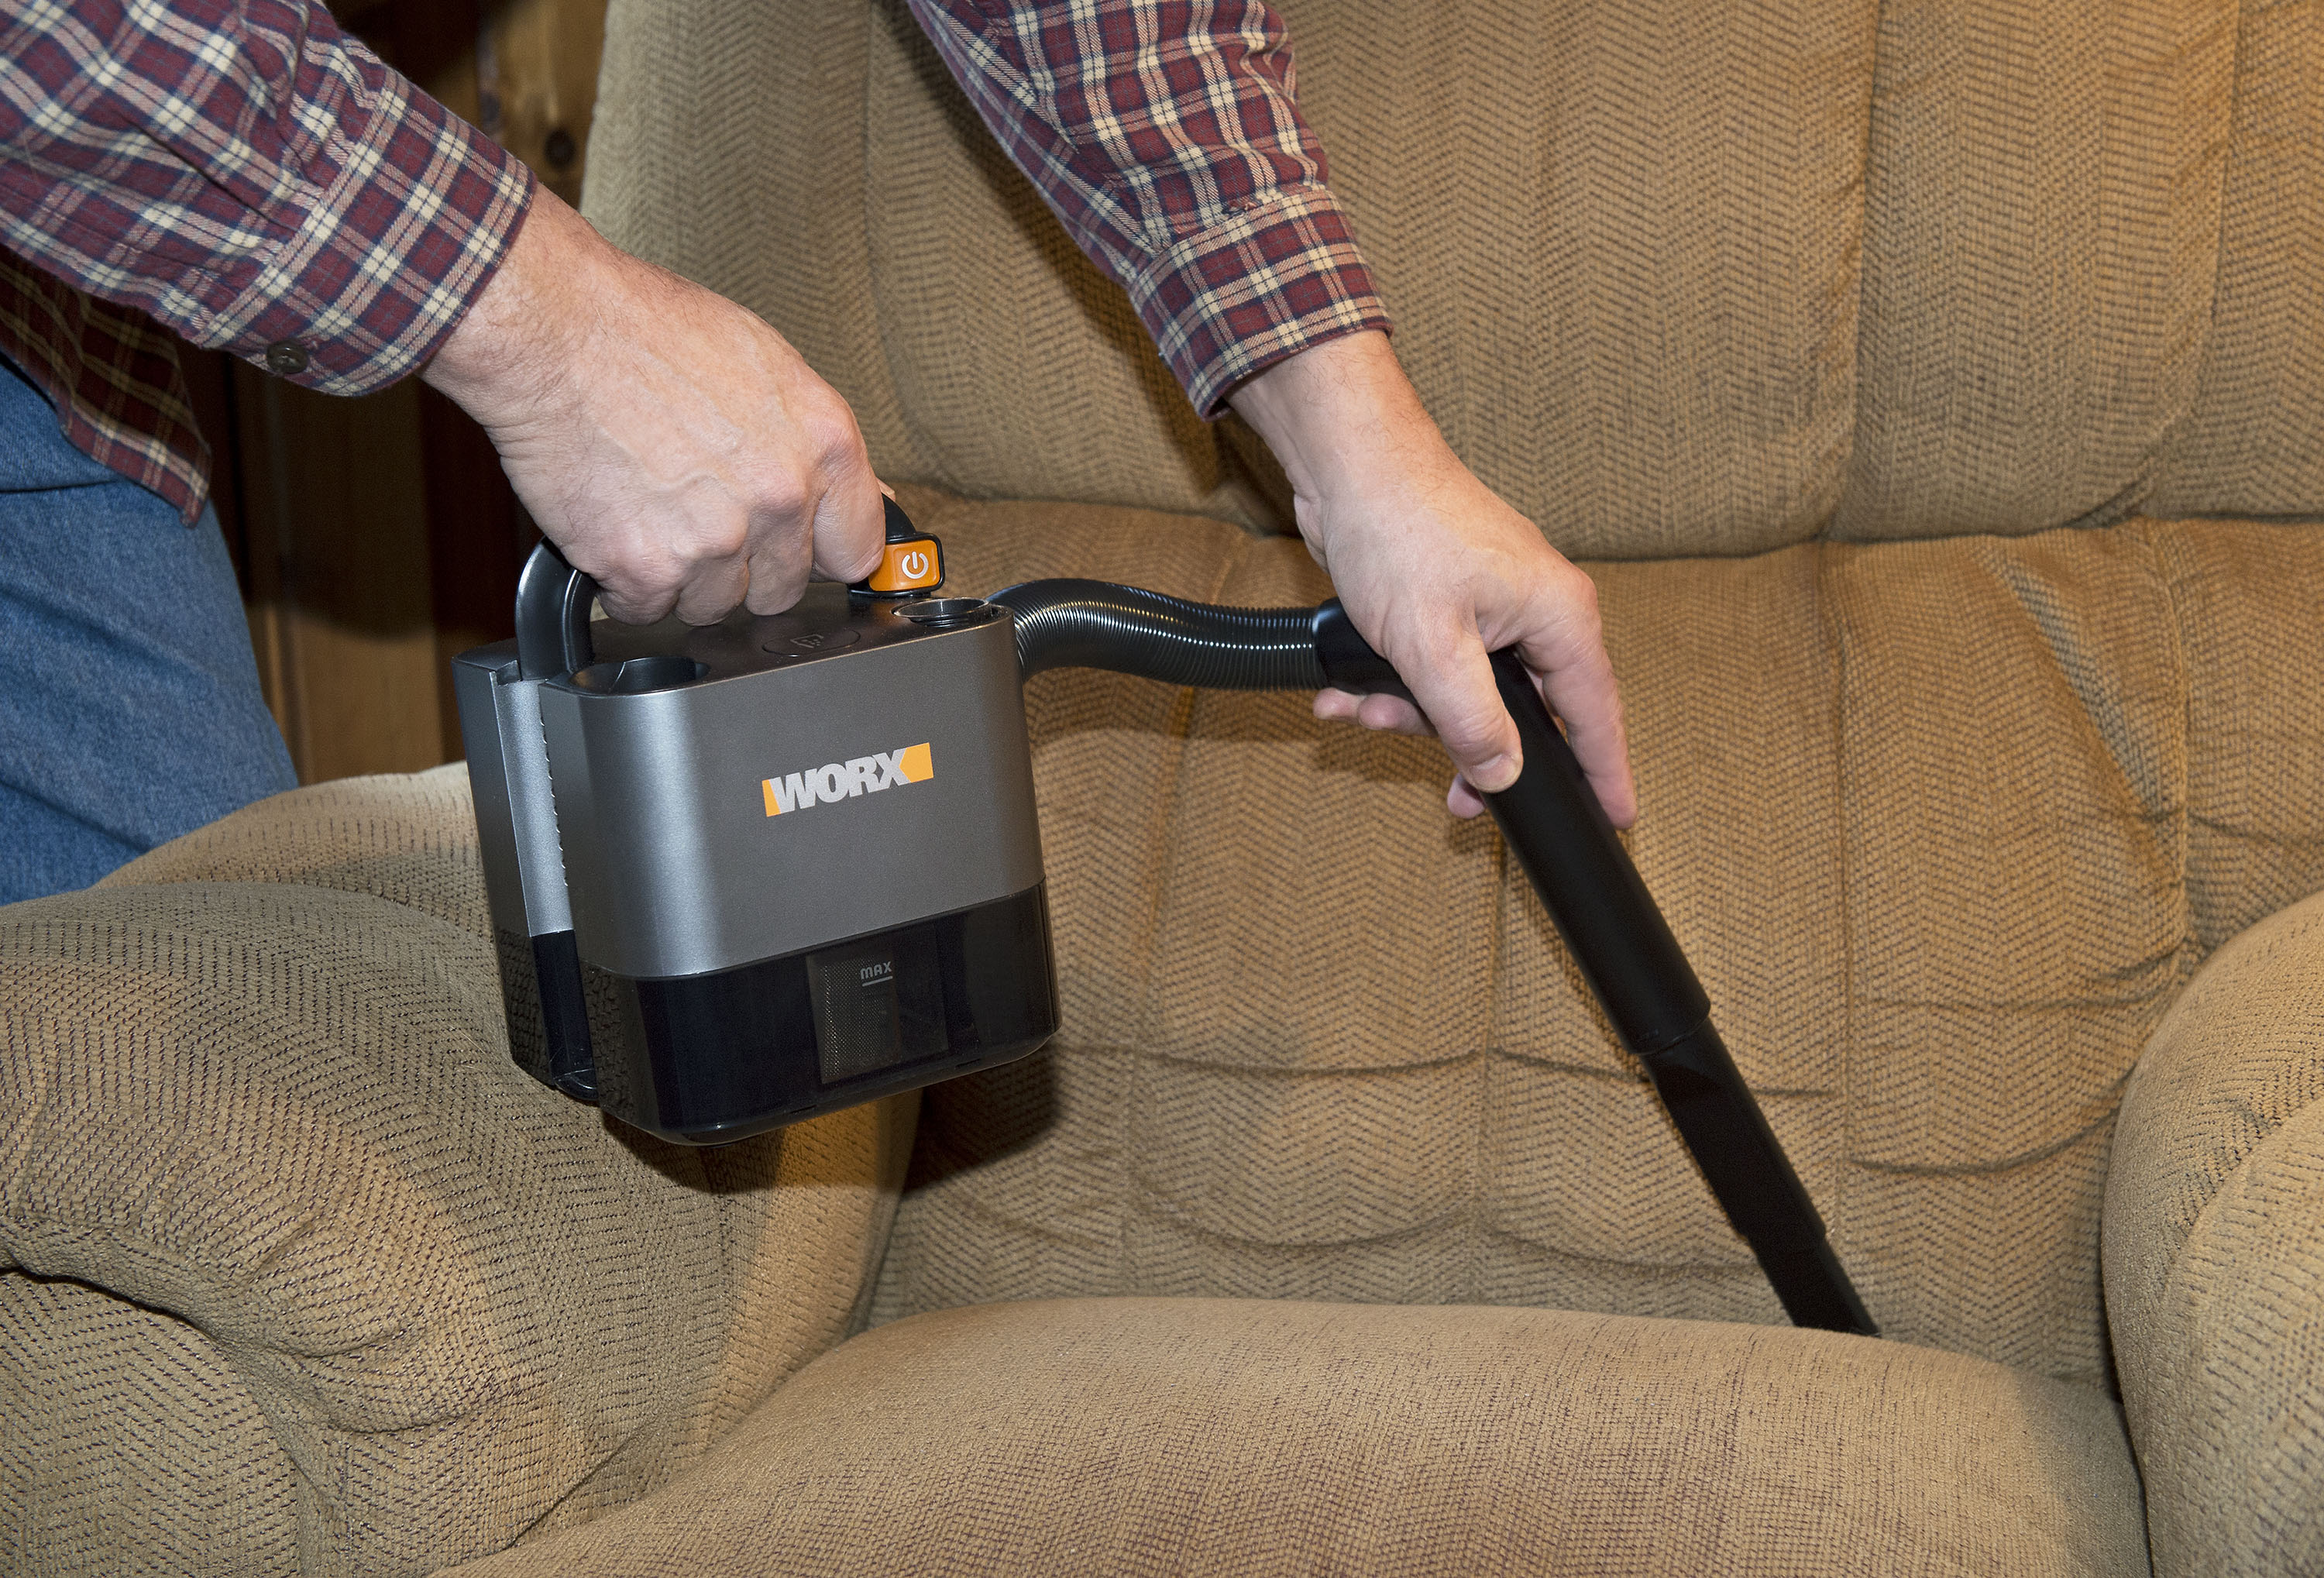 WORX 20V Power Share Portable Vacuum includes a crevice tool for cleaning between chair cushions and other narrow spaces.